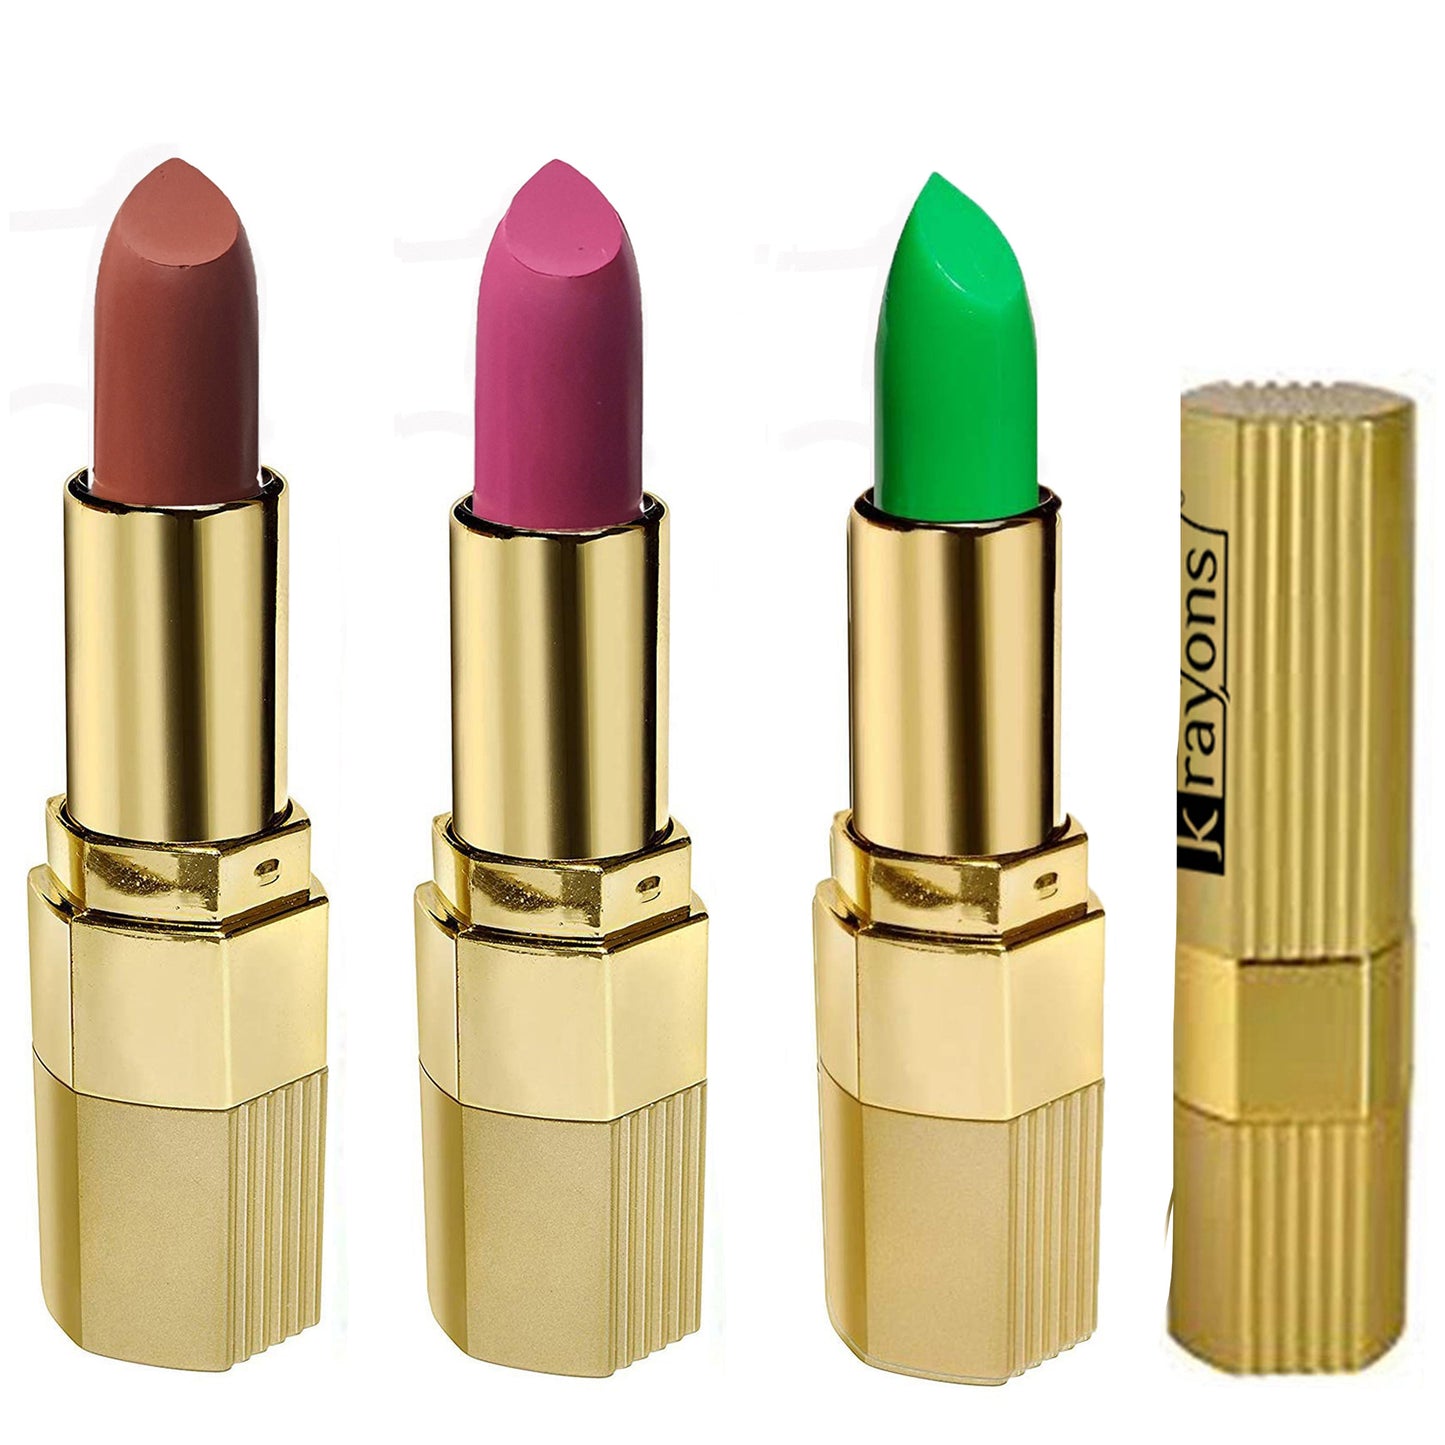 Krayons Desire Lipstick, Highly Pigmented, Longlasting, 3.5g Each, Combo, Pack of 3 (Caramel Brown, Pink Mulbery, Magic Pink)